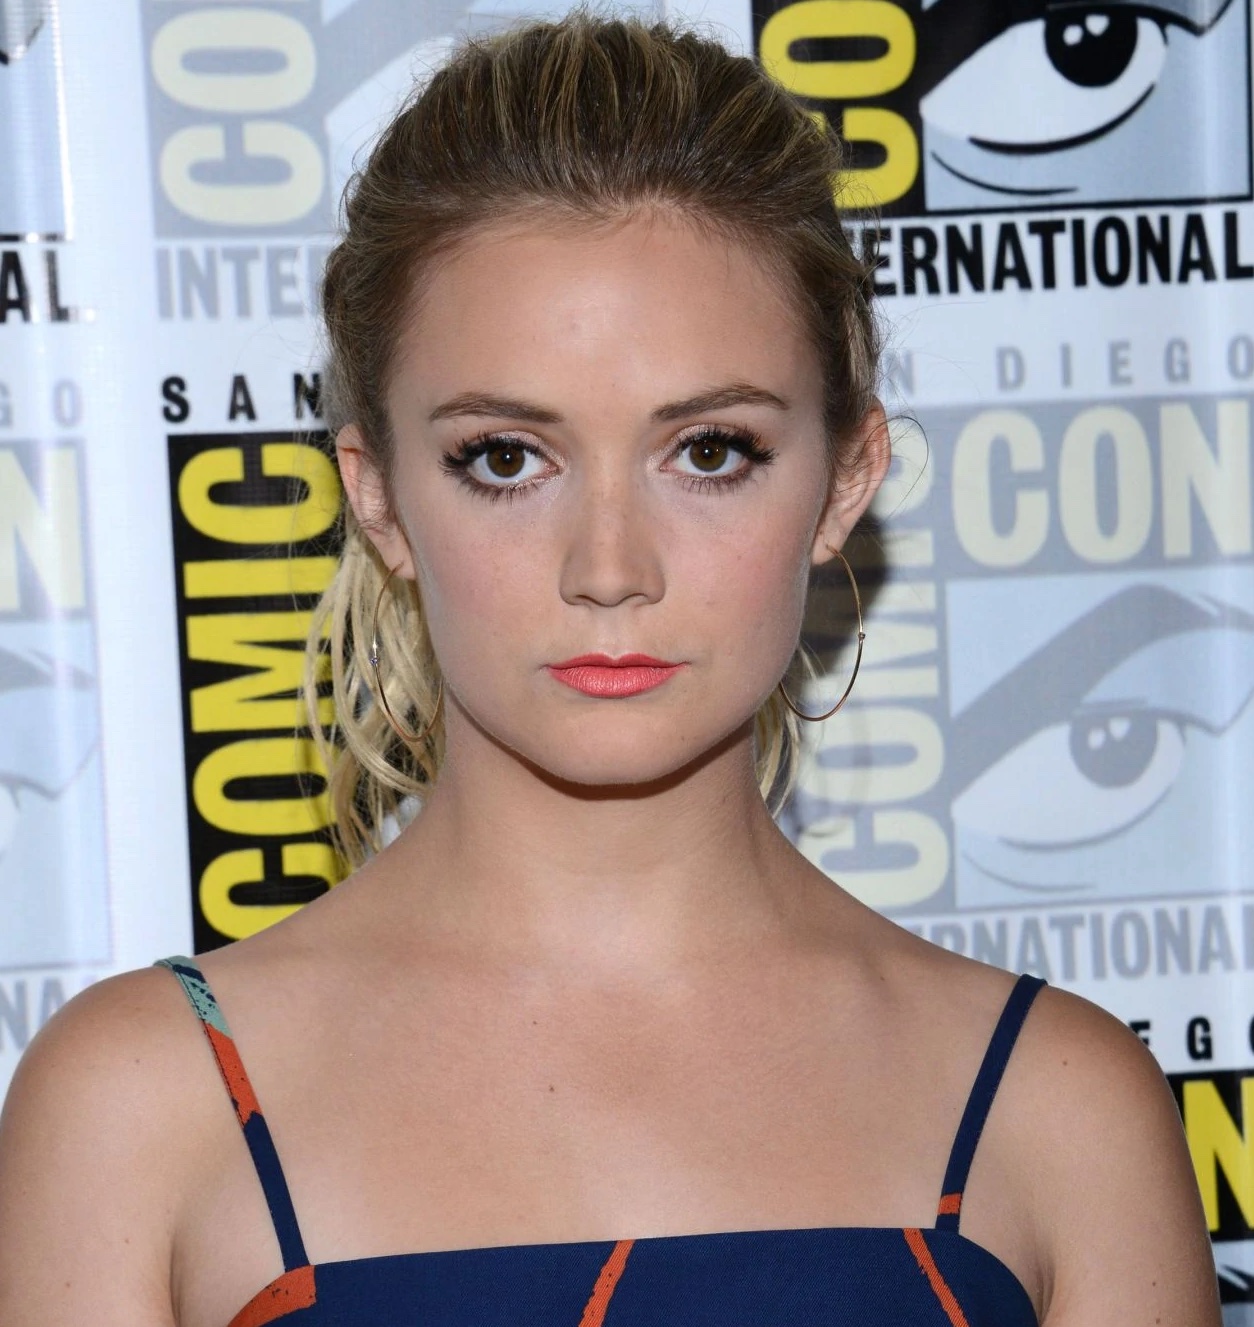 Billie Lourd comes from a family of fame. Carrie Fischer is her mom, making Debbie Reynolds her grandmother.